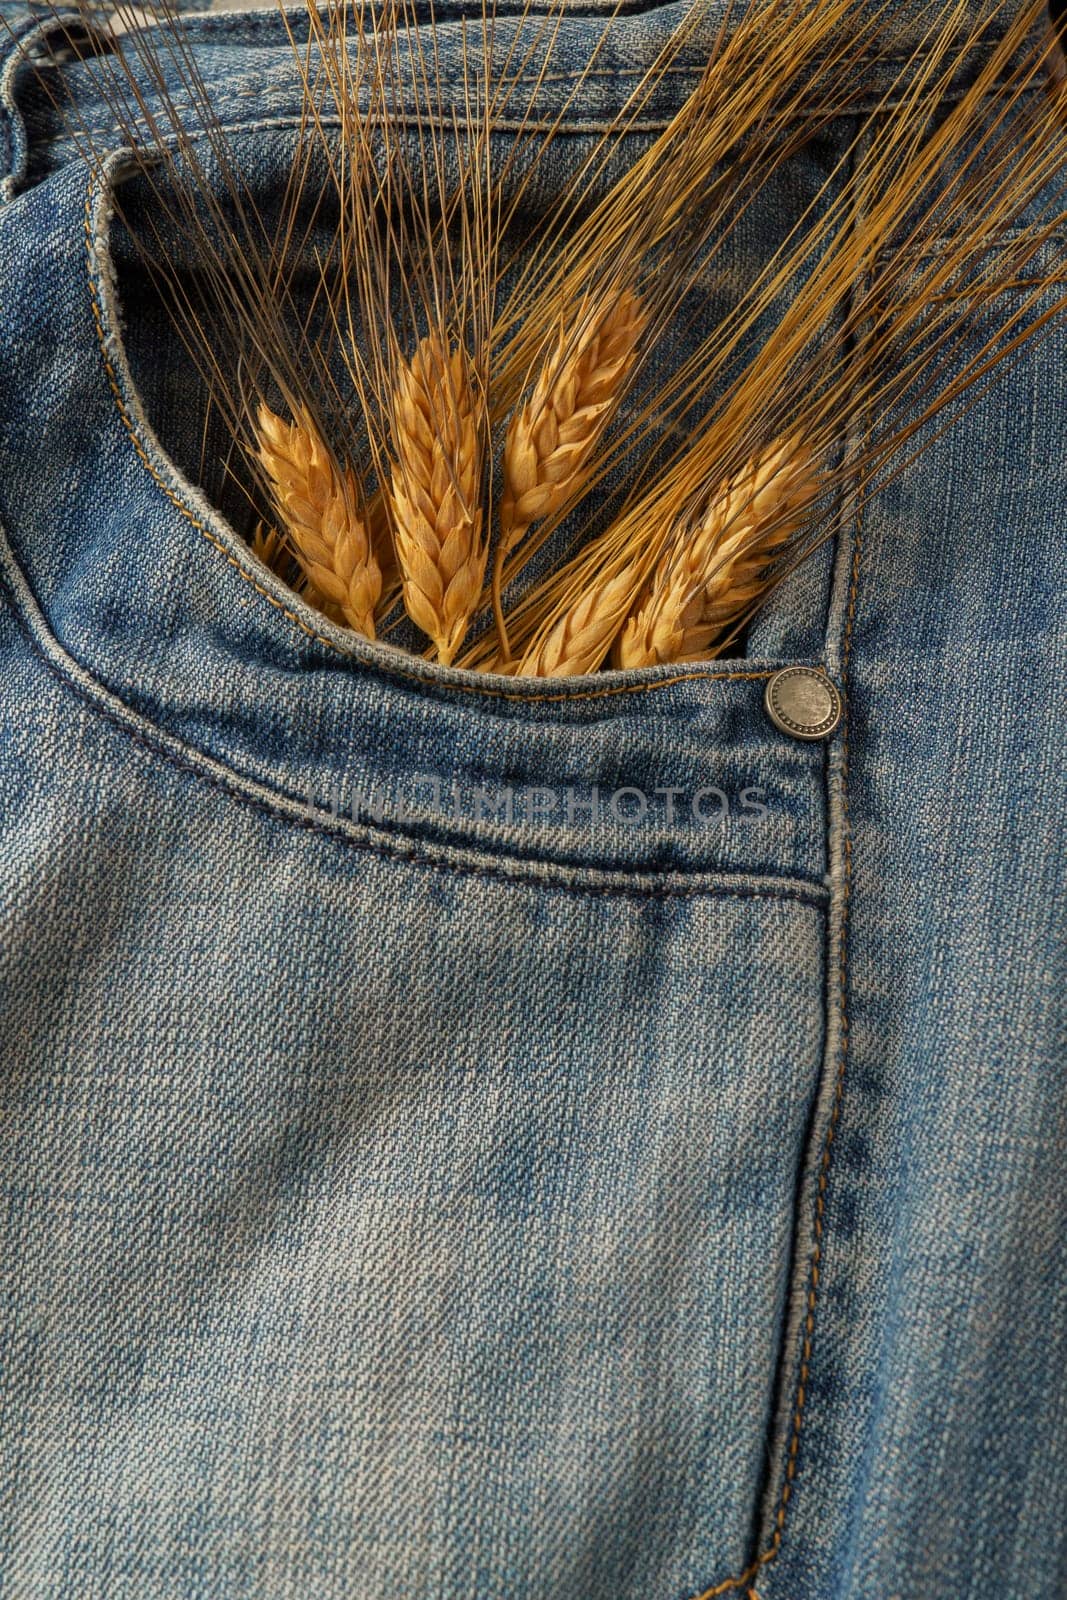 jeans with ears of wheat coming out of the pocket by joseantona